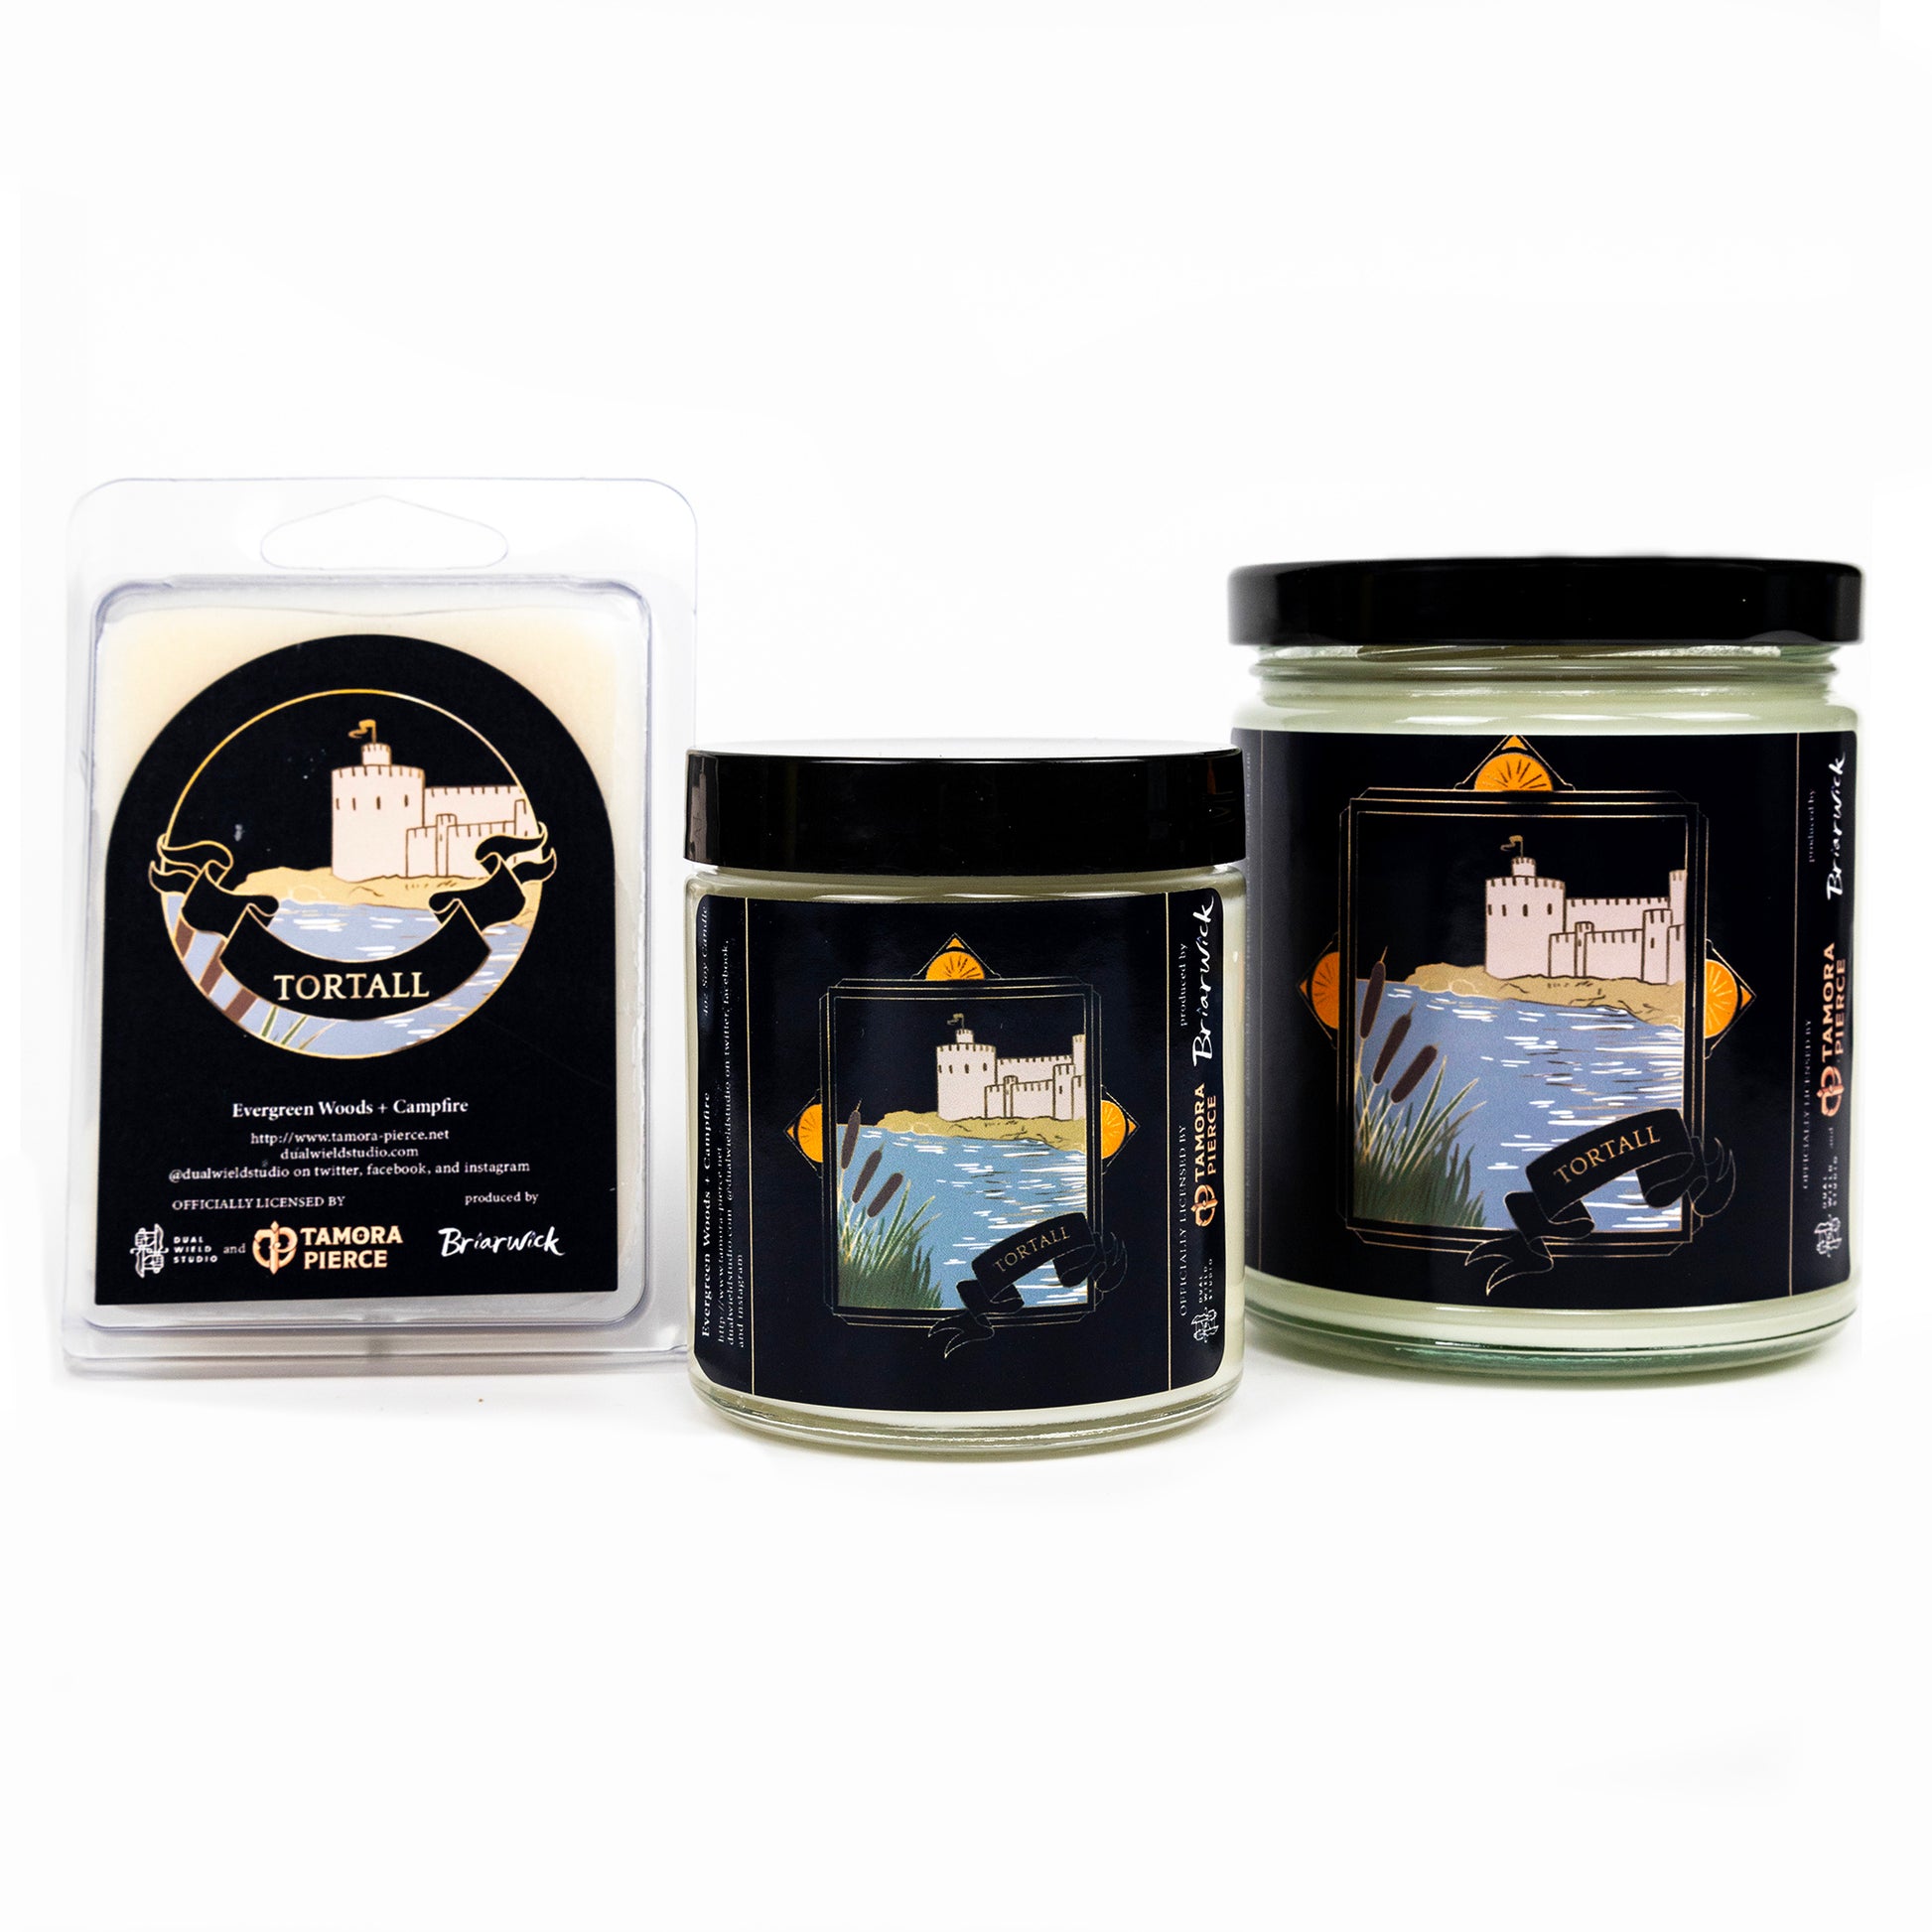 Full set of both Tortall candles and wax melts, all with cream wax. The label illustration shows a castle nestled by a river. 